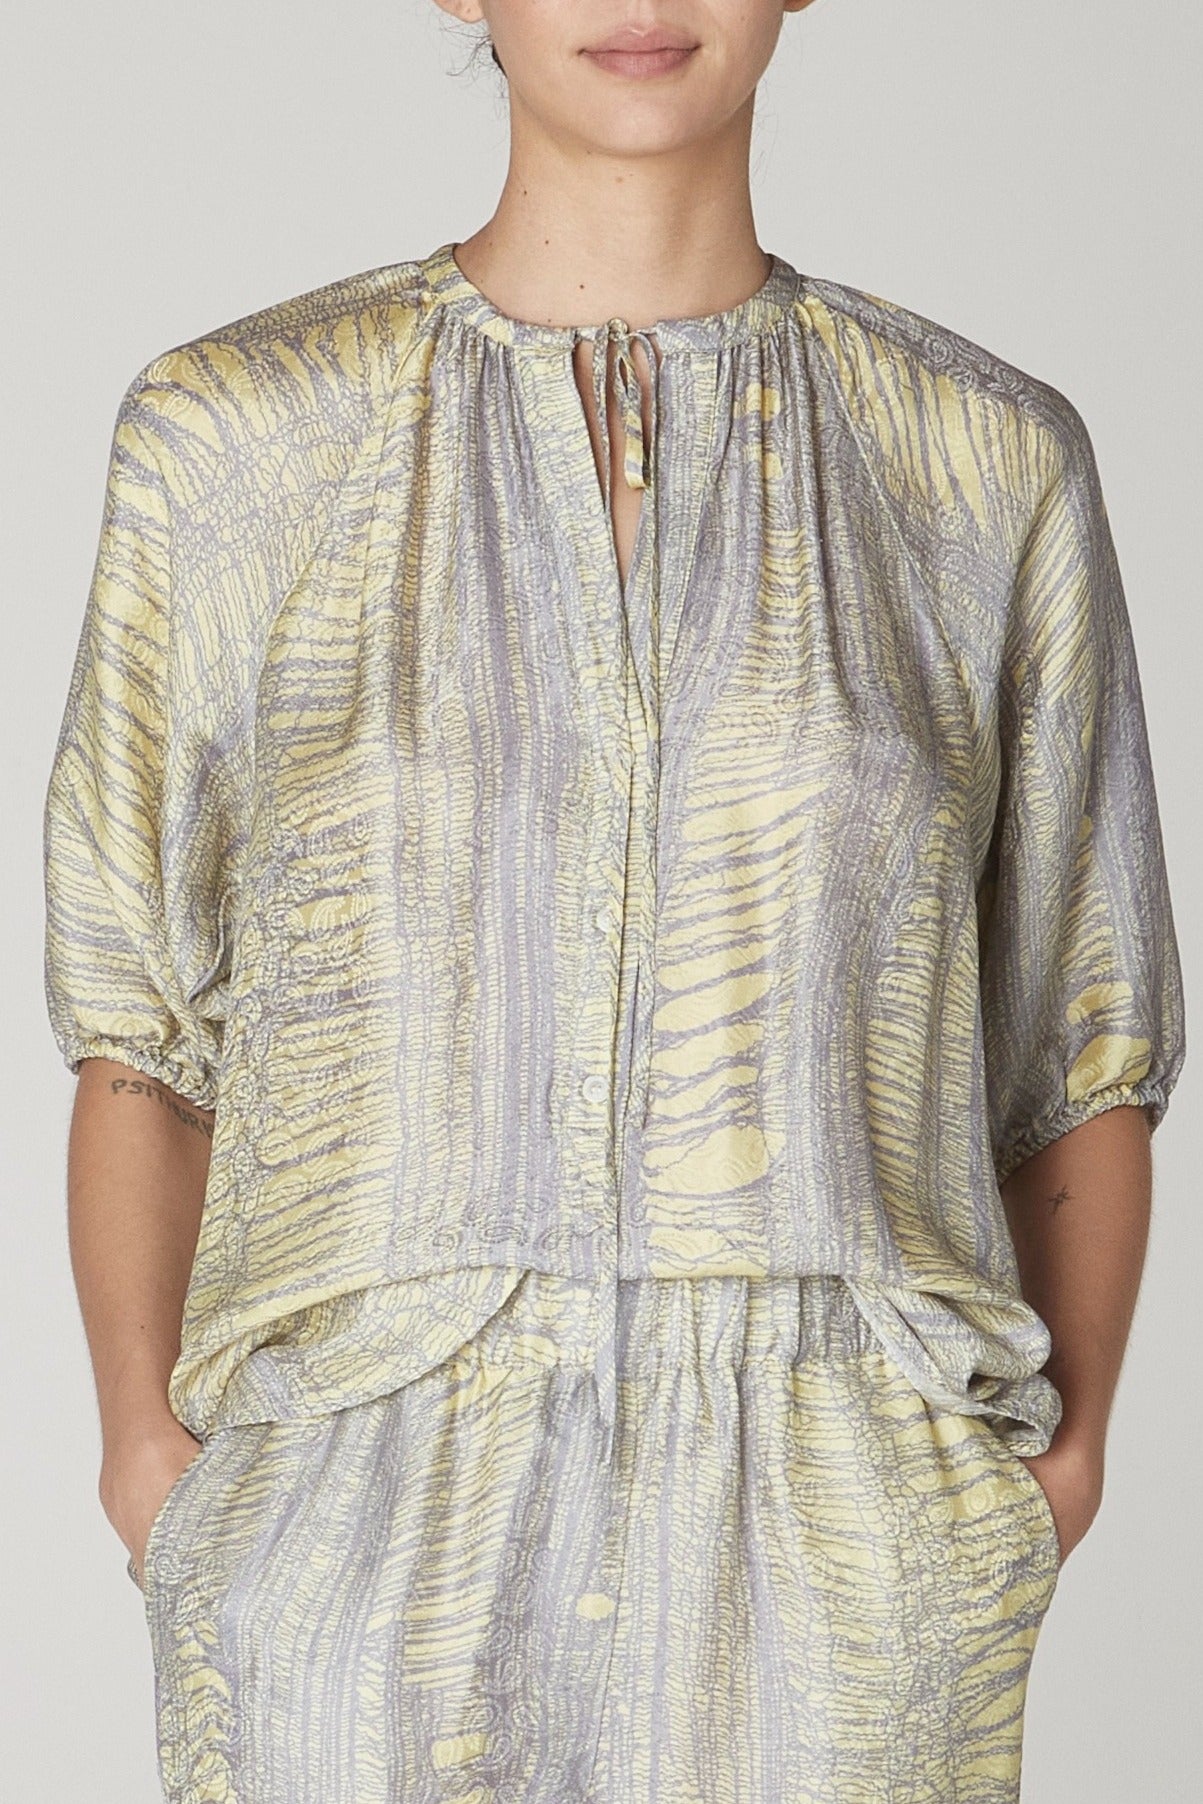 Yellow and Lavender Print Shred Print Poet Top